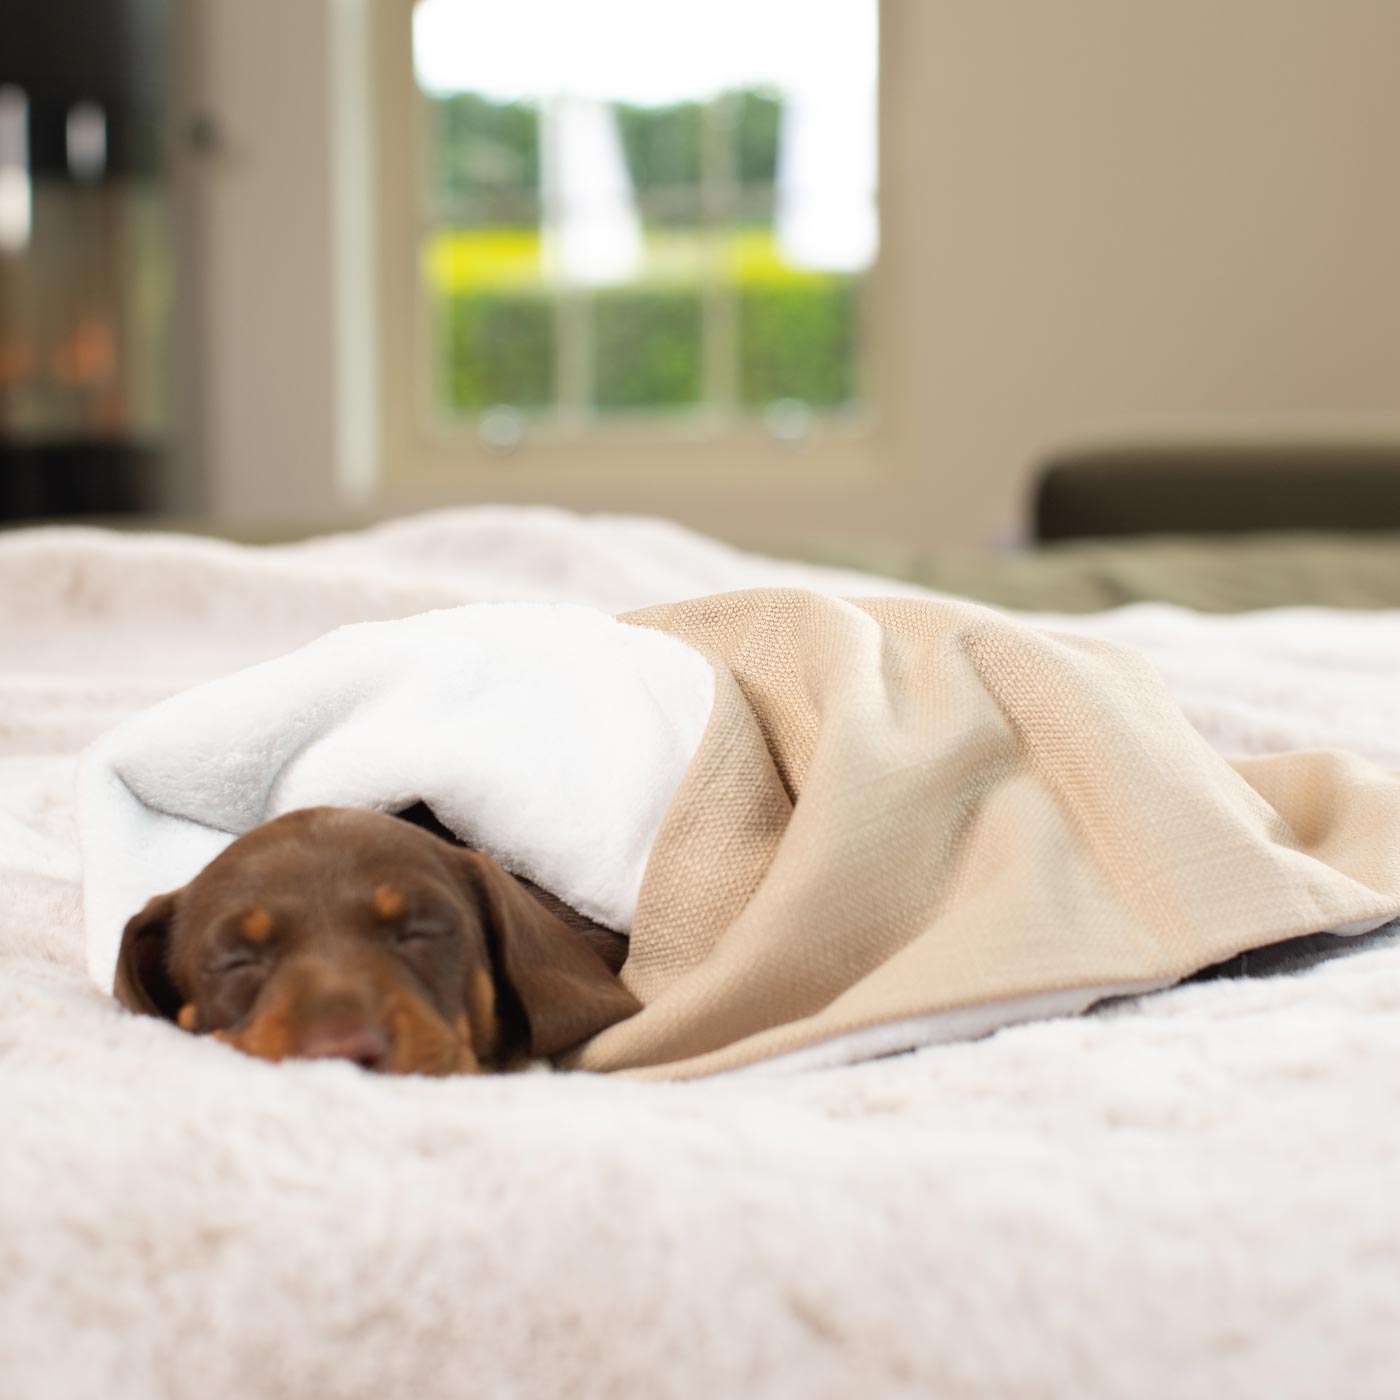 Luxury Savanna Pet Blanket collection, In Stunning Savanna Oatmeal. The Perfect Blanket For Dogs, Available at Lords & Labradors